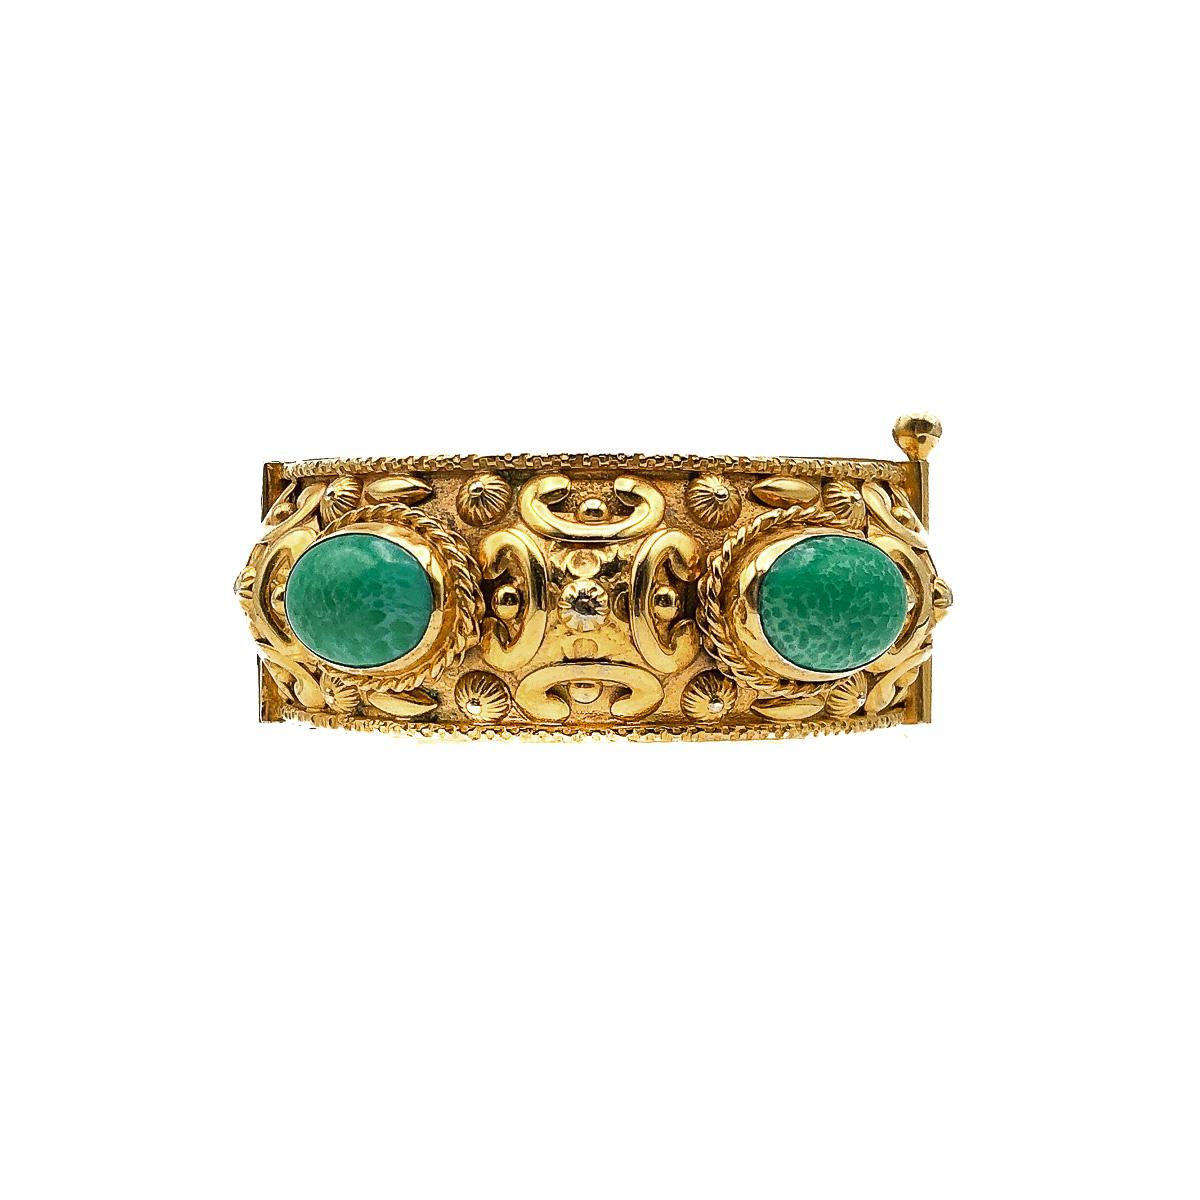 An exquisite Vintage Repousse Cabochon Bangle dating to the 1970s. Featuring four important jade green ceramic stones set within a wonderfully ornate and lustrous, gold plated repousse band. The repousse band is fringed with gold-plated braid and